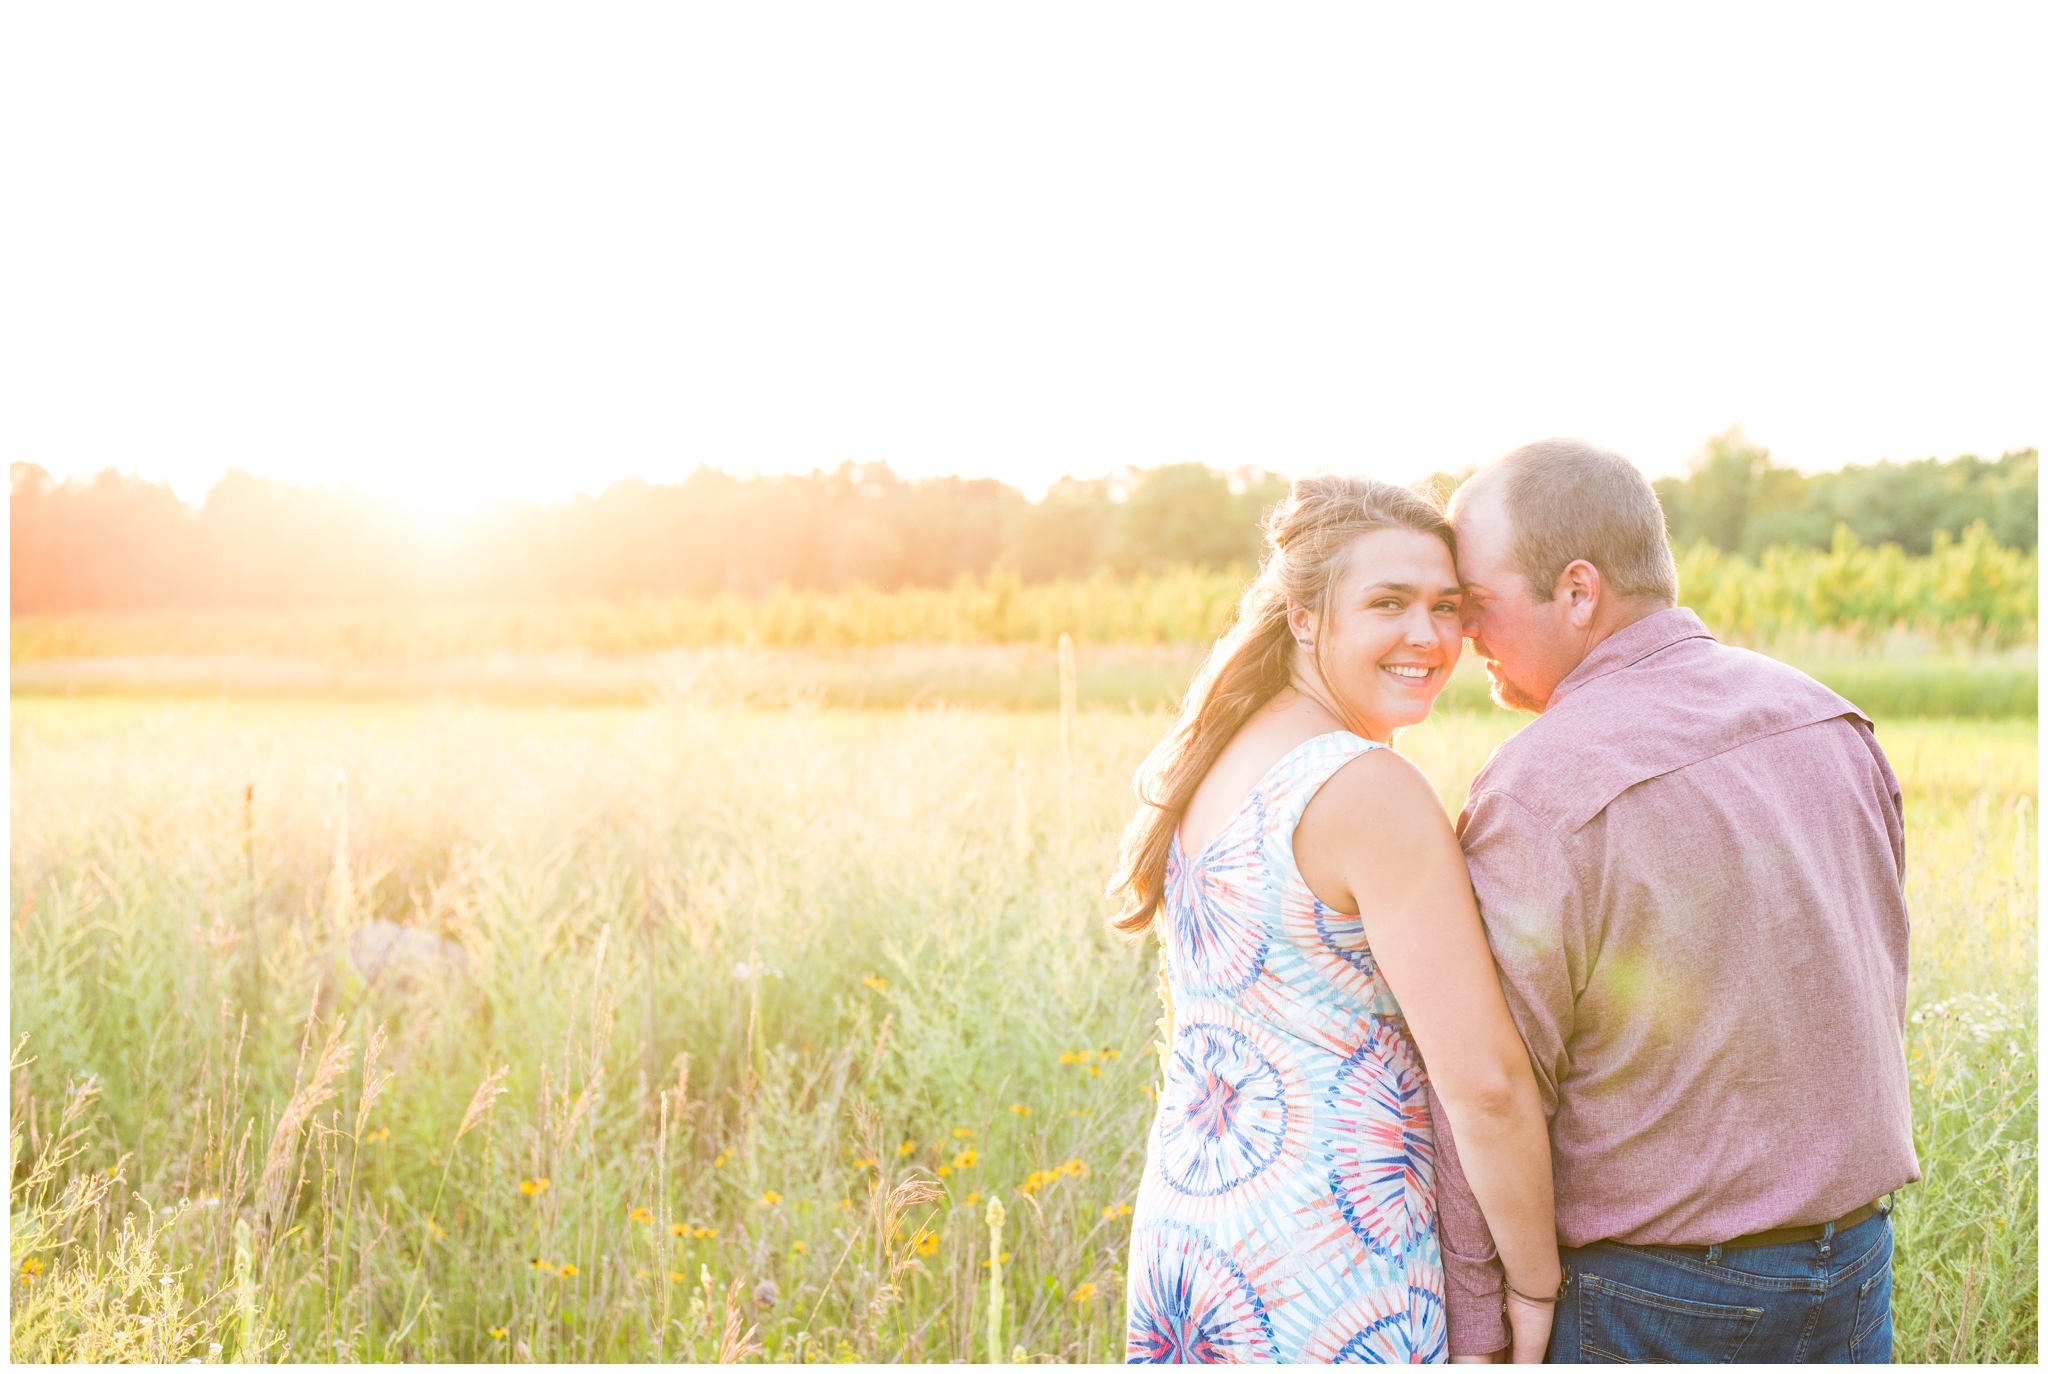 Danielle Kristine Photography, Central Wisconsin Photographer